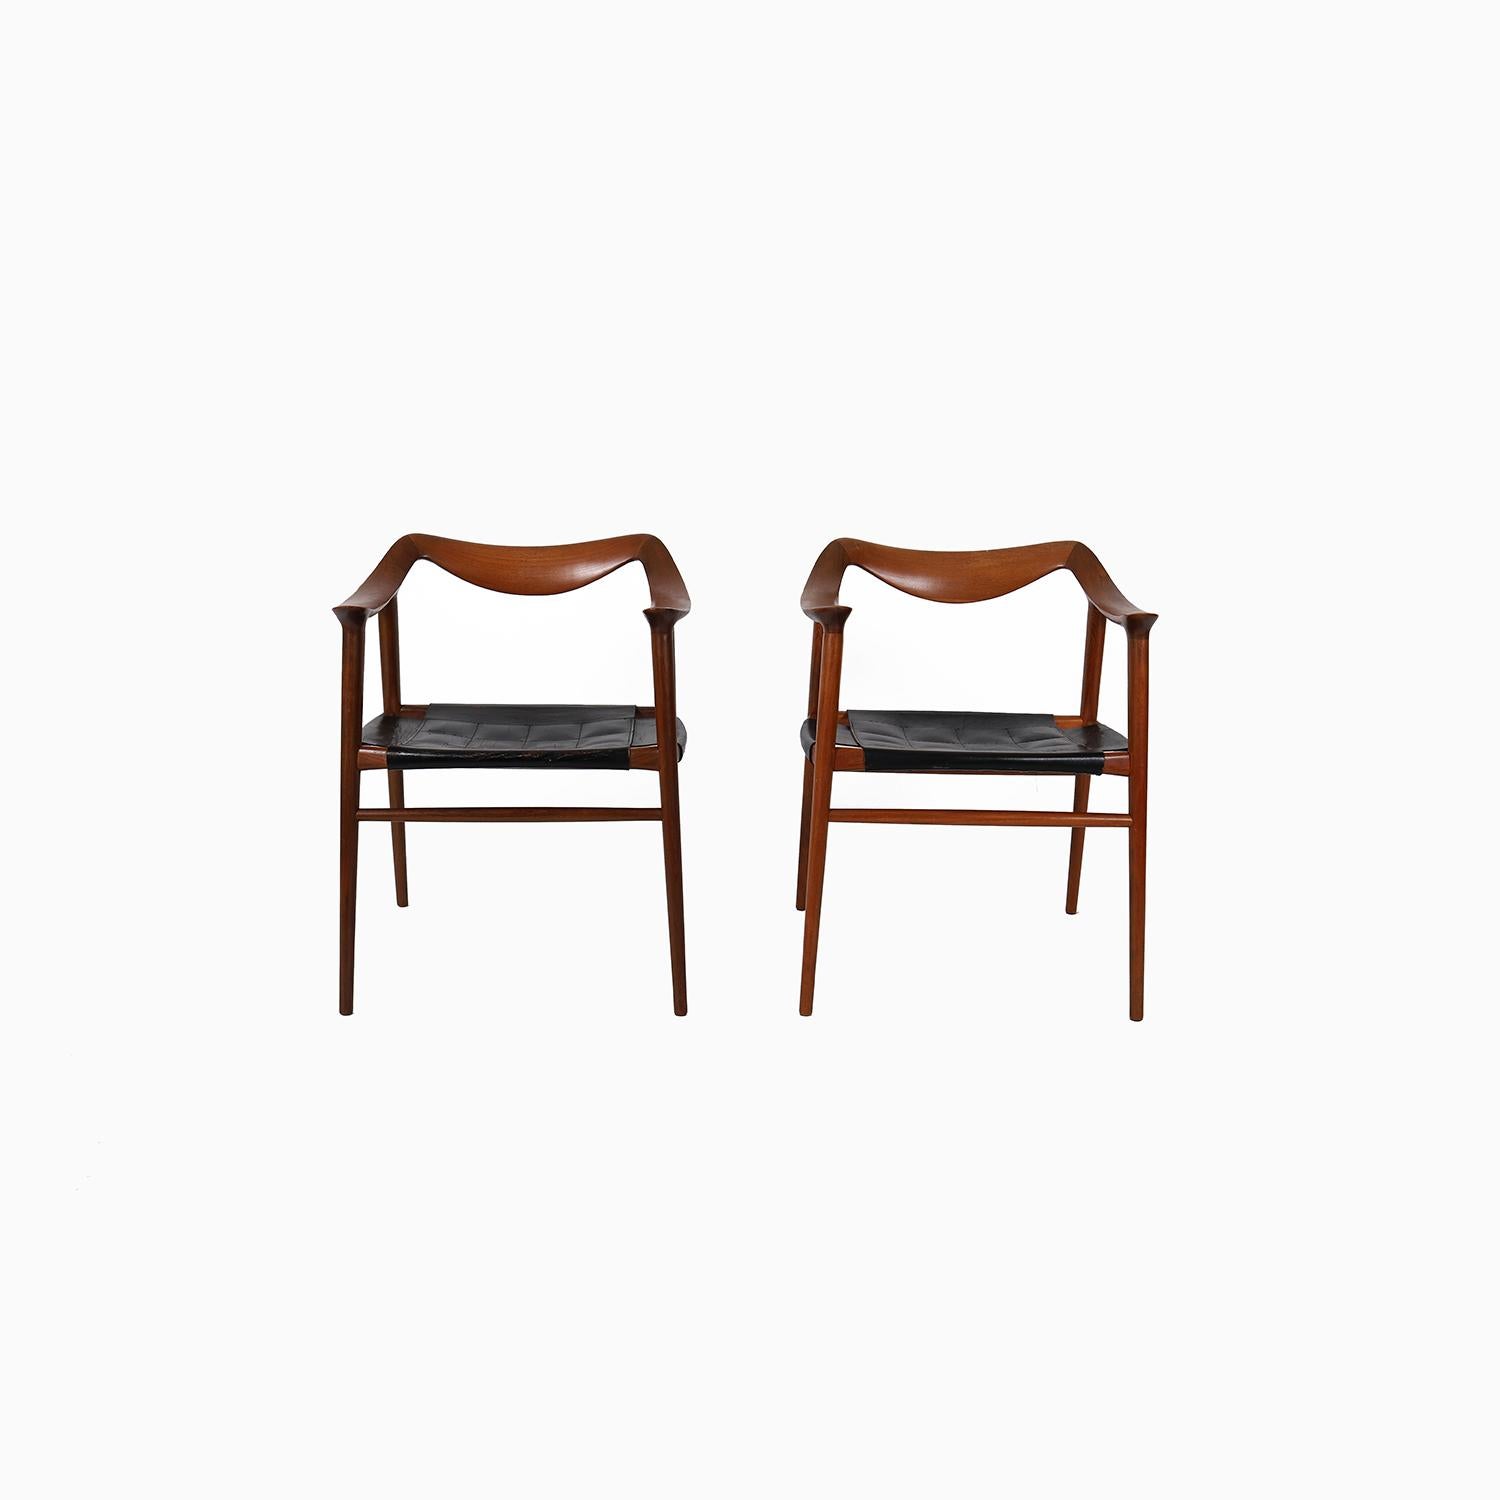 A beautiful design by Norwegian designers Rastad & Relling for Gustav Bauhus. These chairs have a very expressive arm design. A light weight sculpted profile. Seats retain their original quilted leather. Price is per chair.

Professional, skilled